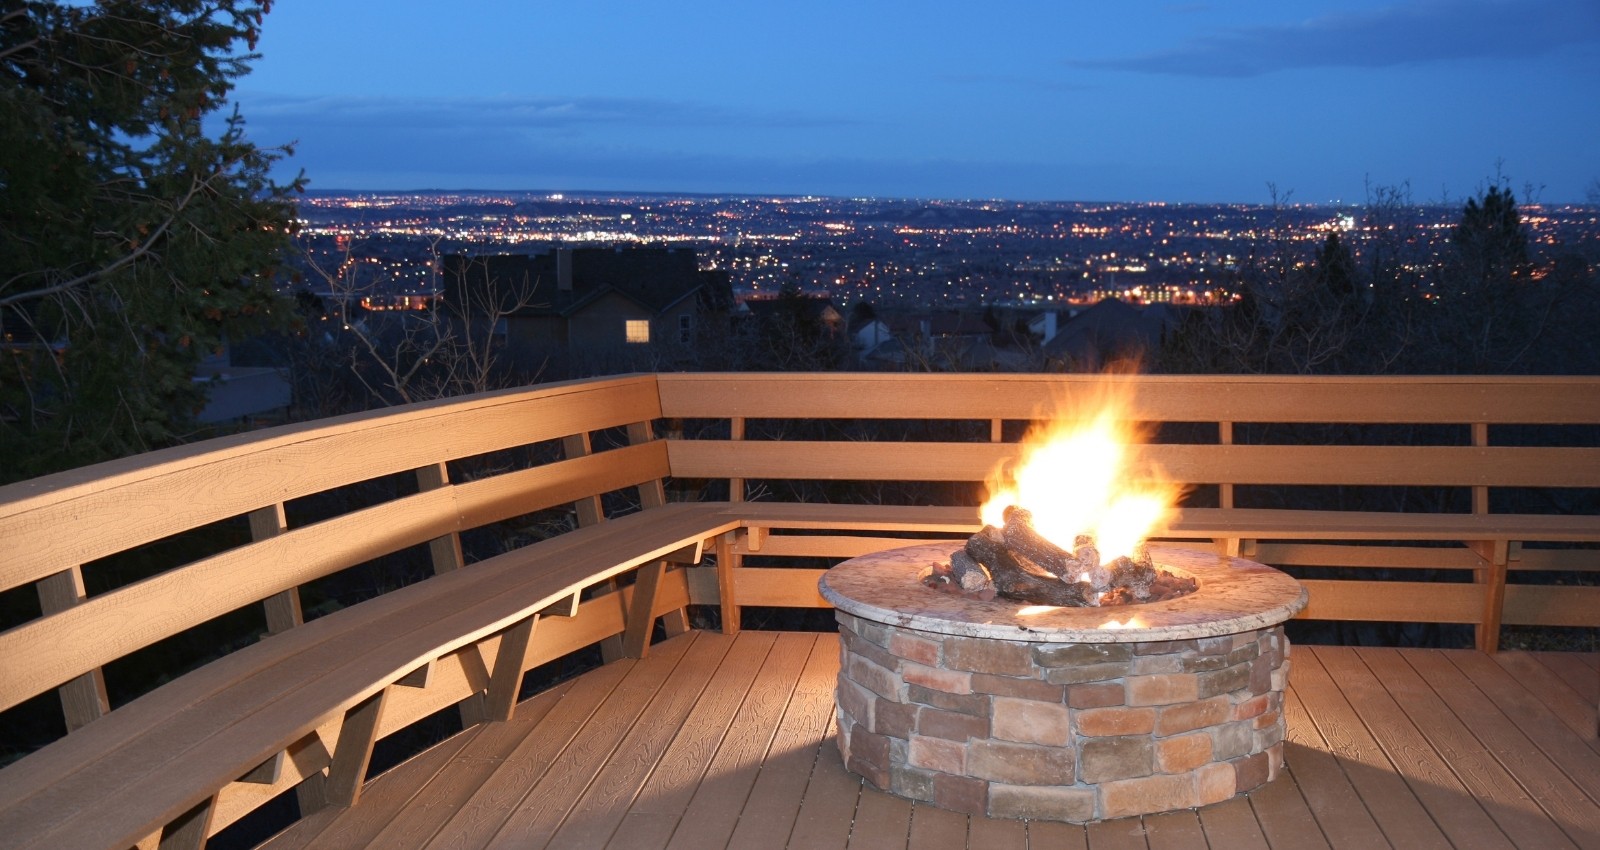 The Best Fire Pits For A Wood Deck, Is It Safe To Use A Propane Fire Pit On Wooden Deck